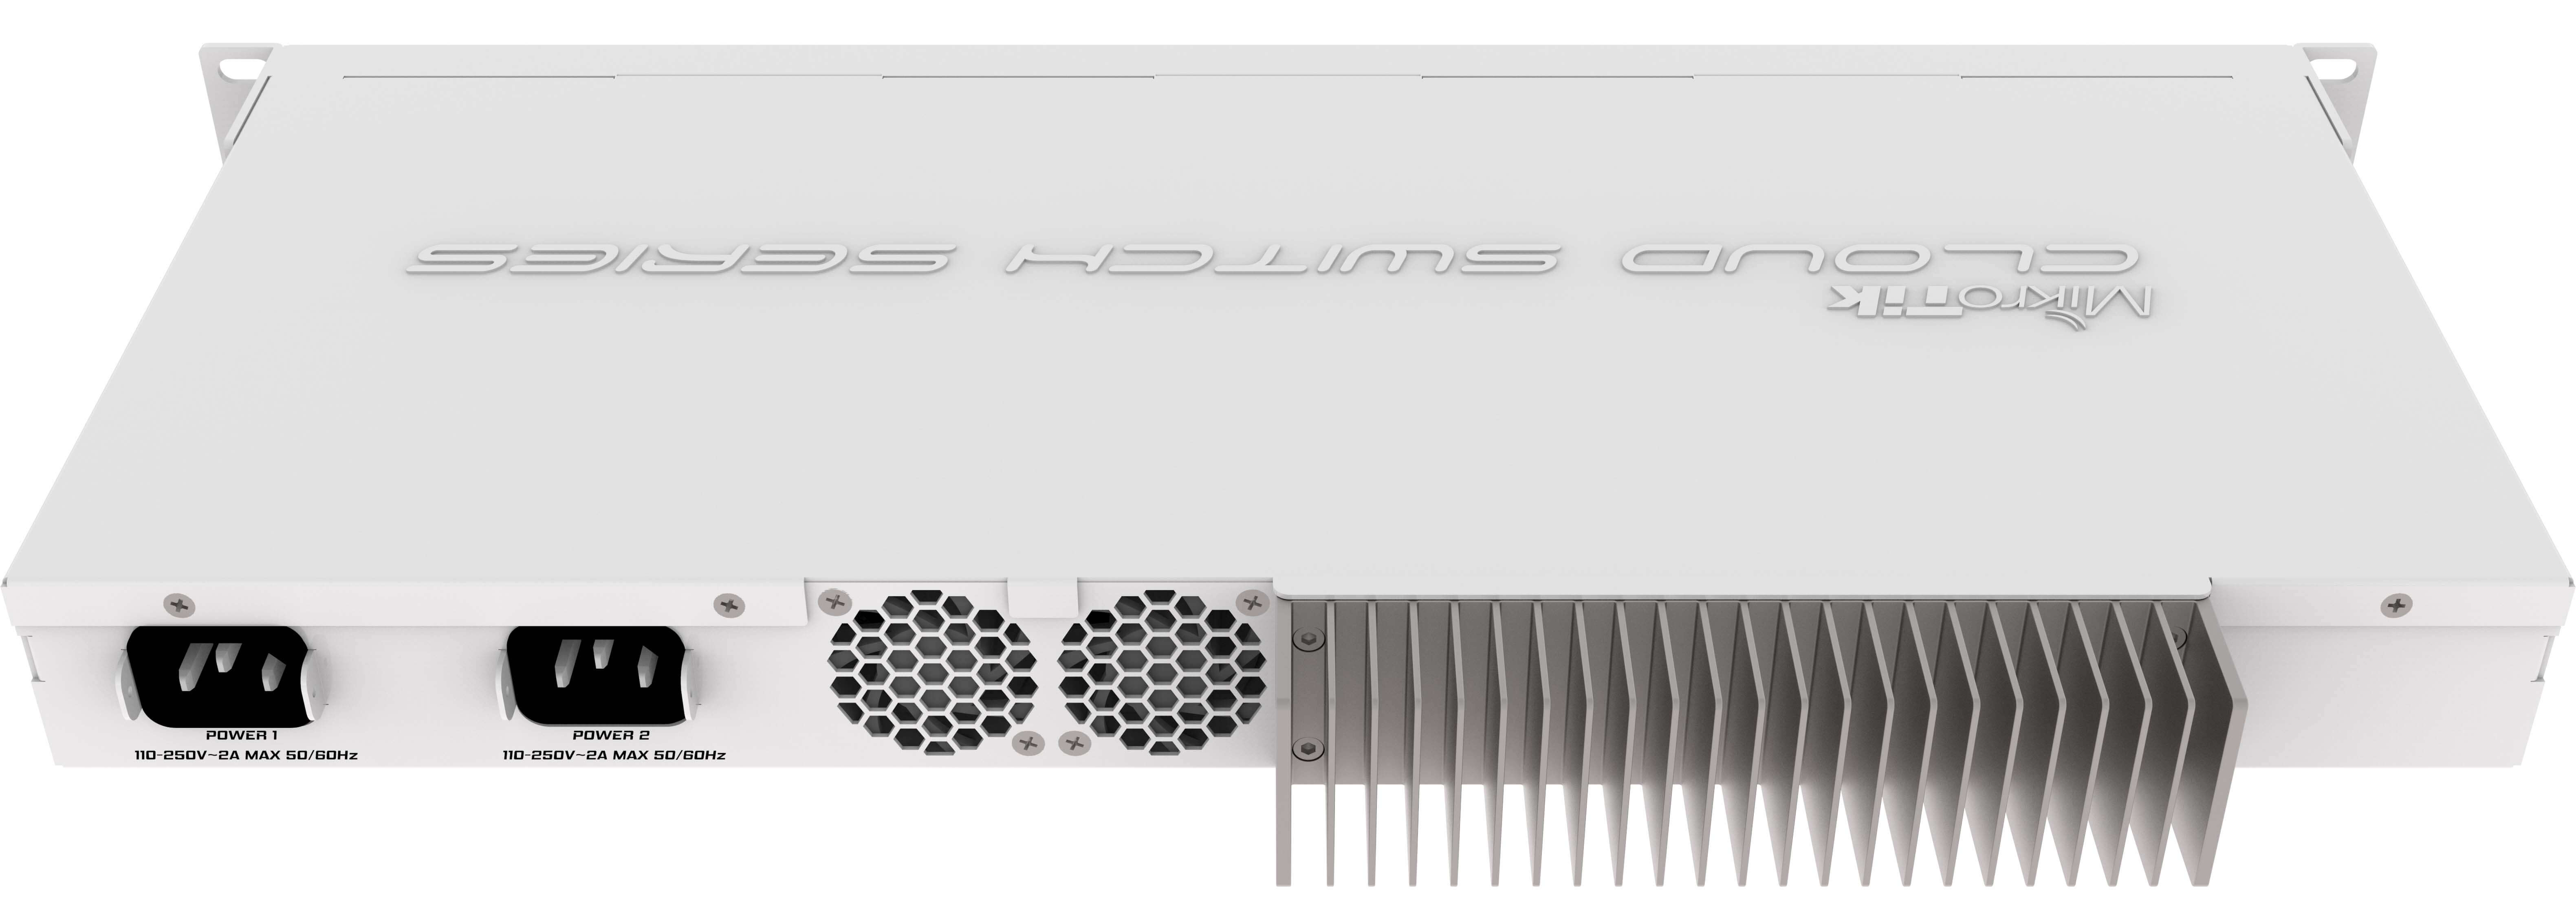 MikroTik CRS317-1G-16S+RM Router - Switch